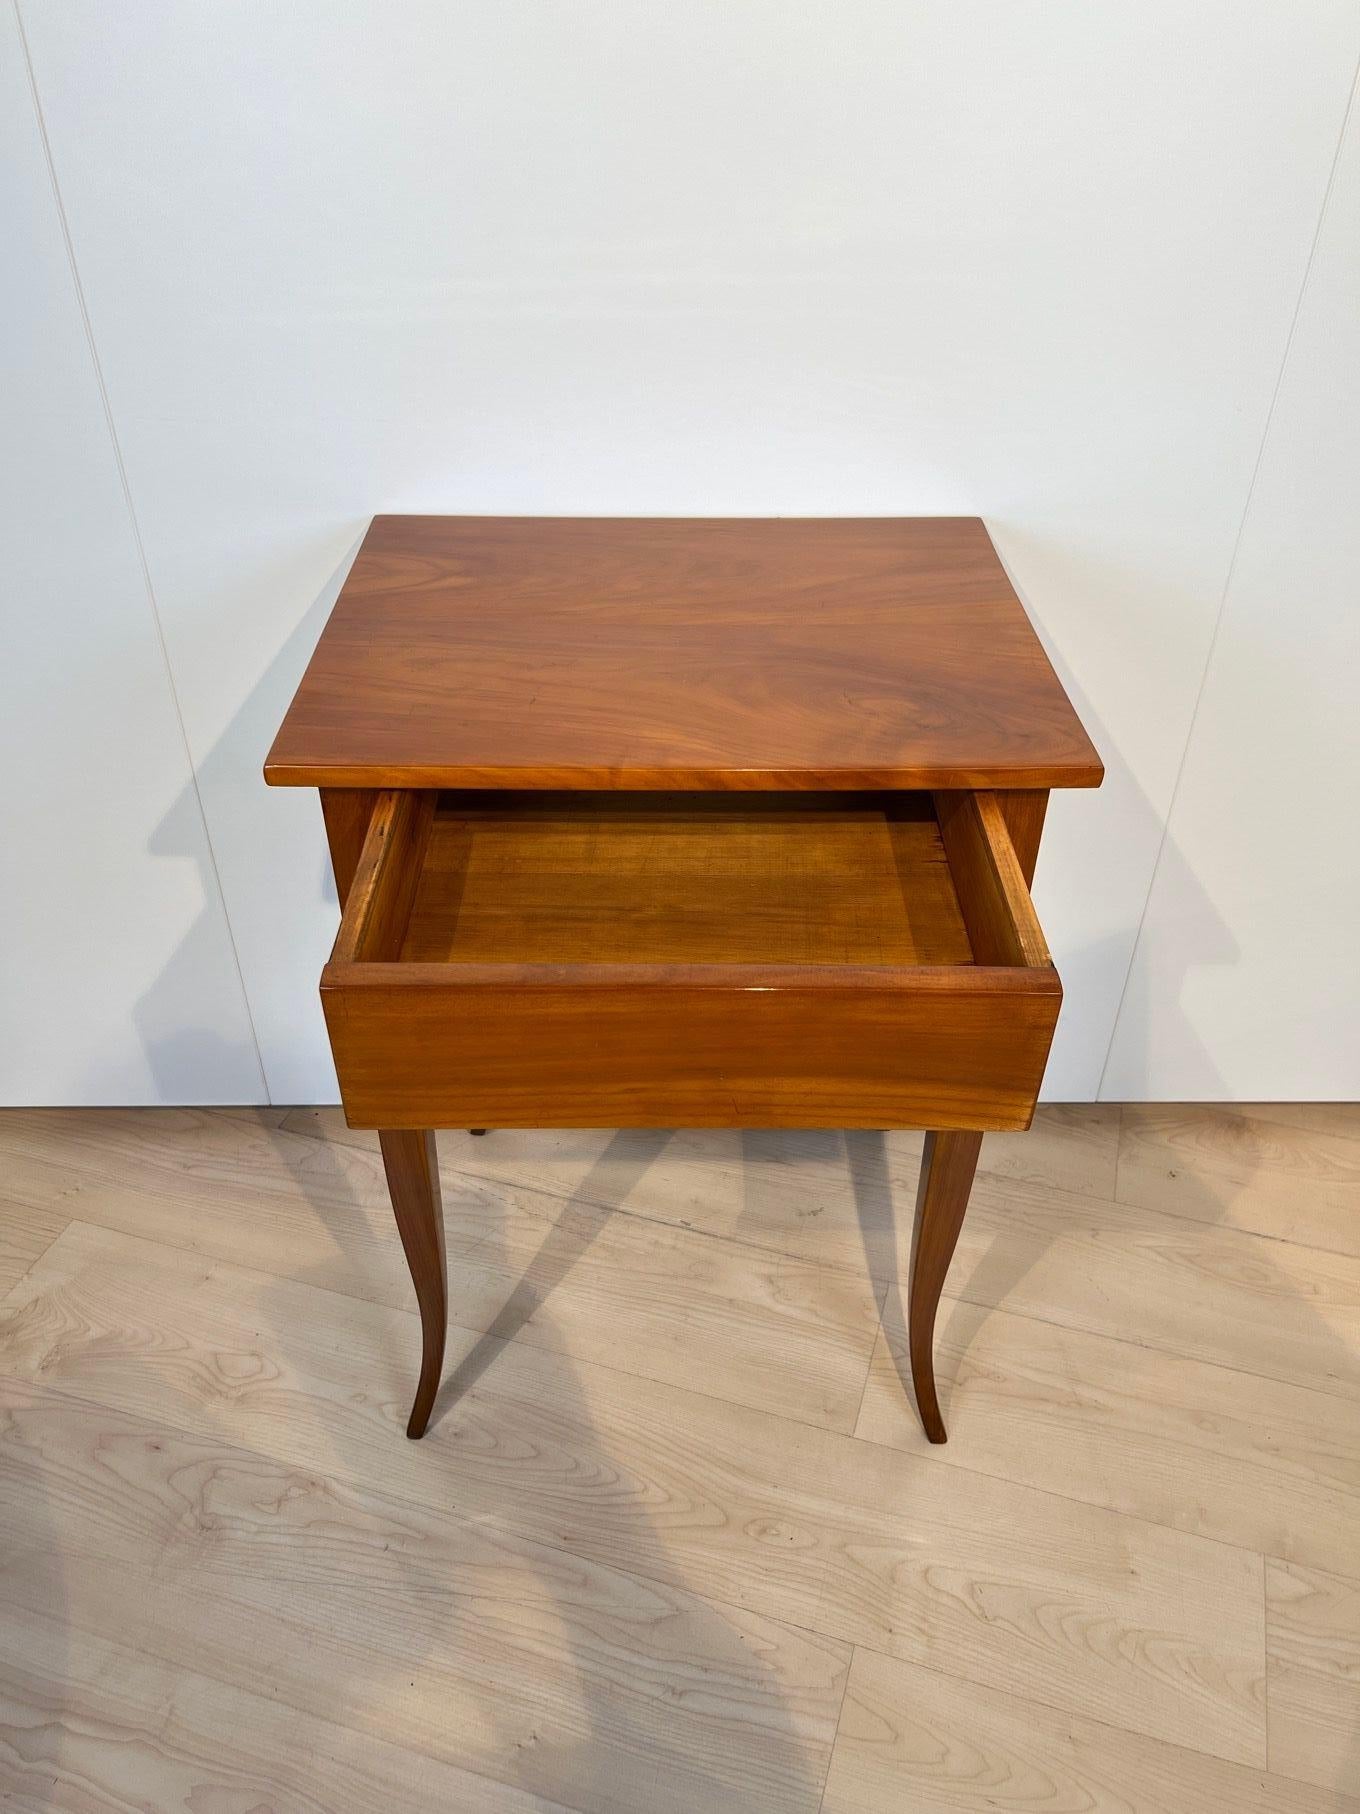 Biedermeier Side Table with Drawer, Cherry Wood, South Germany circa 1825 In Good Condition For Sale In Regensburg, DE